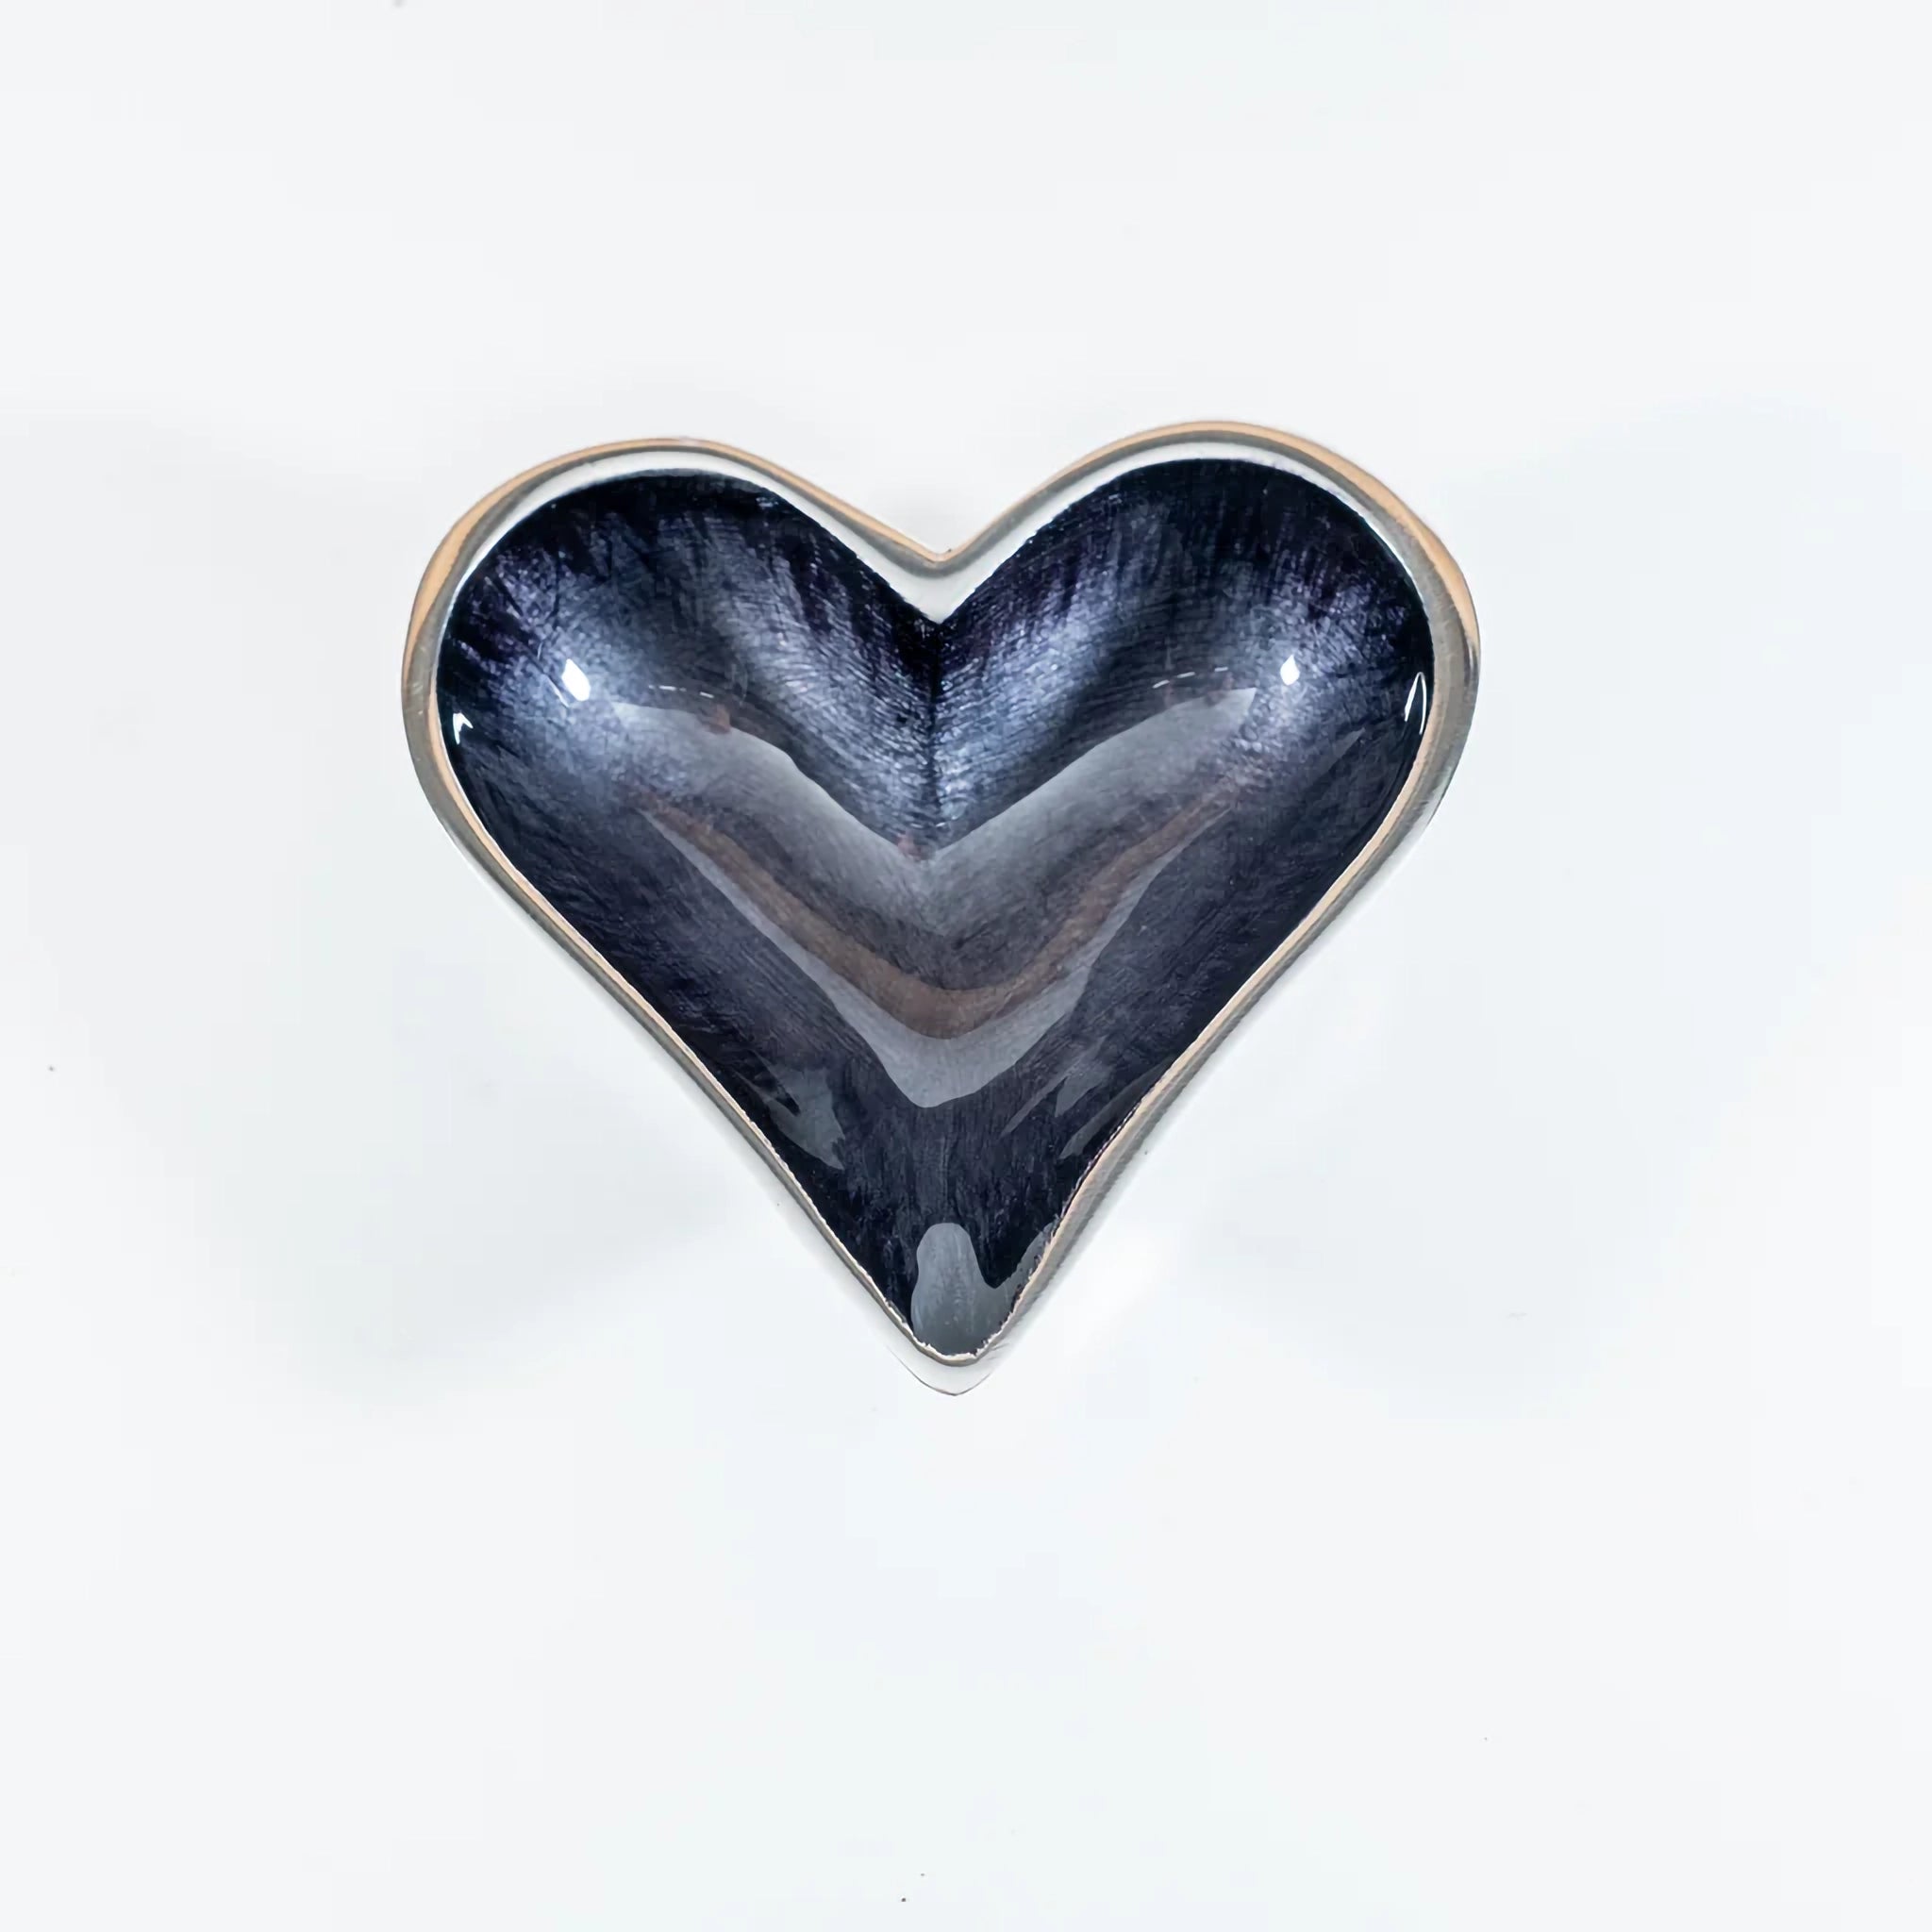 A silver aluminium heart shaped dish with black ombre enamel inside  top view